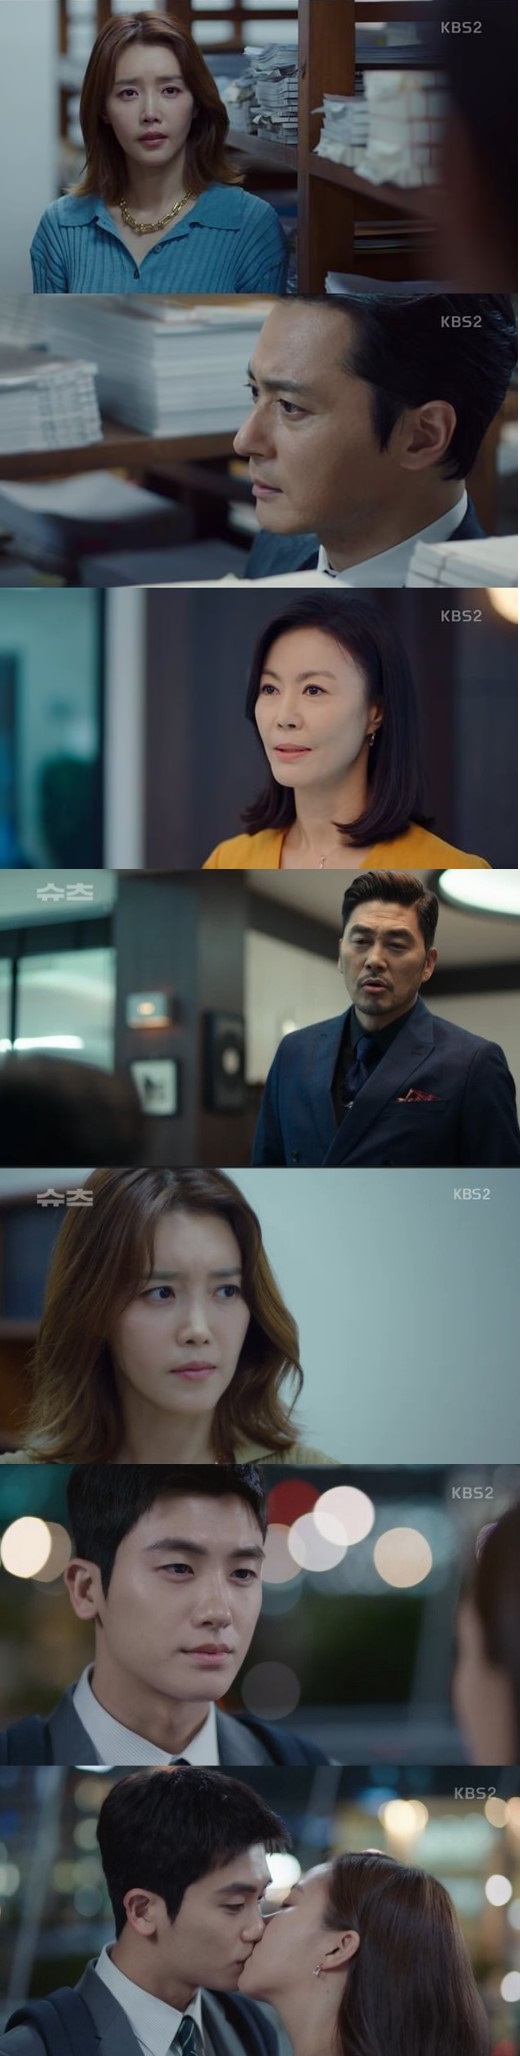 Suits Chae Jung-an was eventually fired, and Park Hyung-sik and Ko Sung-hee announced their love affair.In the KBS 2TV drama Suits, which was broadcast on the afternoon of the 6th, the images of Miniforce Seok (Jang Dong-gun), Park Hyung-sik and Hong Da-ham (Chae Jung-an) who helped him got on the air.On this day, Ham tried to kick out the Miniforce seat, and he fell into a trap.So, Representative Ham (Kim Young-ho) came to him and asked if he knew the weakness of Miniforce stone, and Ko Yeon-woo found a breakthrough when he realized that he could be a weakness of Miniforce stone.In addition, Representative Ham and Chae Geun-sik (Choi Ki-hwa) set up a scheme to send out Miniforce seats, and Chae Geun-sik worked with Kim Moon-hee (Son Yeo-eun).Immediately, Miniforce Seok and Ko met once again with David Kim (Son Seok-gu) due to the Toyota accident lawsuit, and at the same time Hong Da-ham (Chae Jung-an) stepped out to find the document.On the other hand, Ko Yeon-woo has become bigger enough to introduce Kim Ji-na to her grandmother. I want to know more about Kim Ji-na.It is not always, but suddenly, he expressed his favorite mind.Since then, Miniforce has found that the CEO of the Toyota company wanted to recognize the defects directly and agree with the bereaved family, and at the same time, the Hongdae did not tell Miniforce the truth.Ham reached an agreement, but Hong Da-ham was fired, and Miniforce told Kang Ha-yeon the truth and he was willing to fire Hong Da-ham himself, and he strengthened his development.